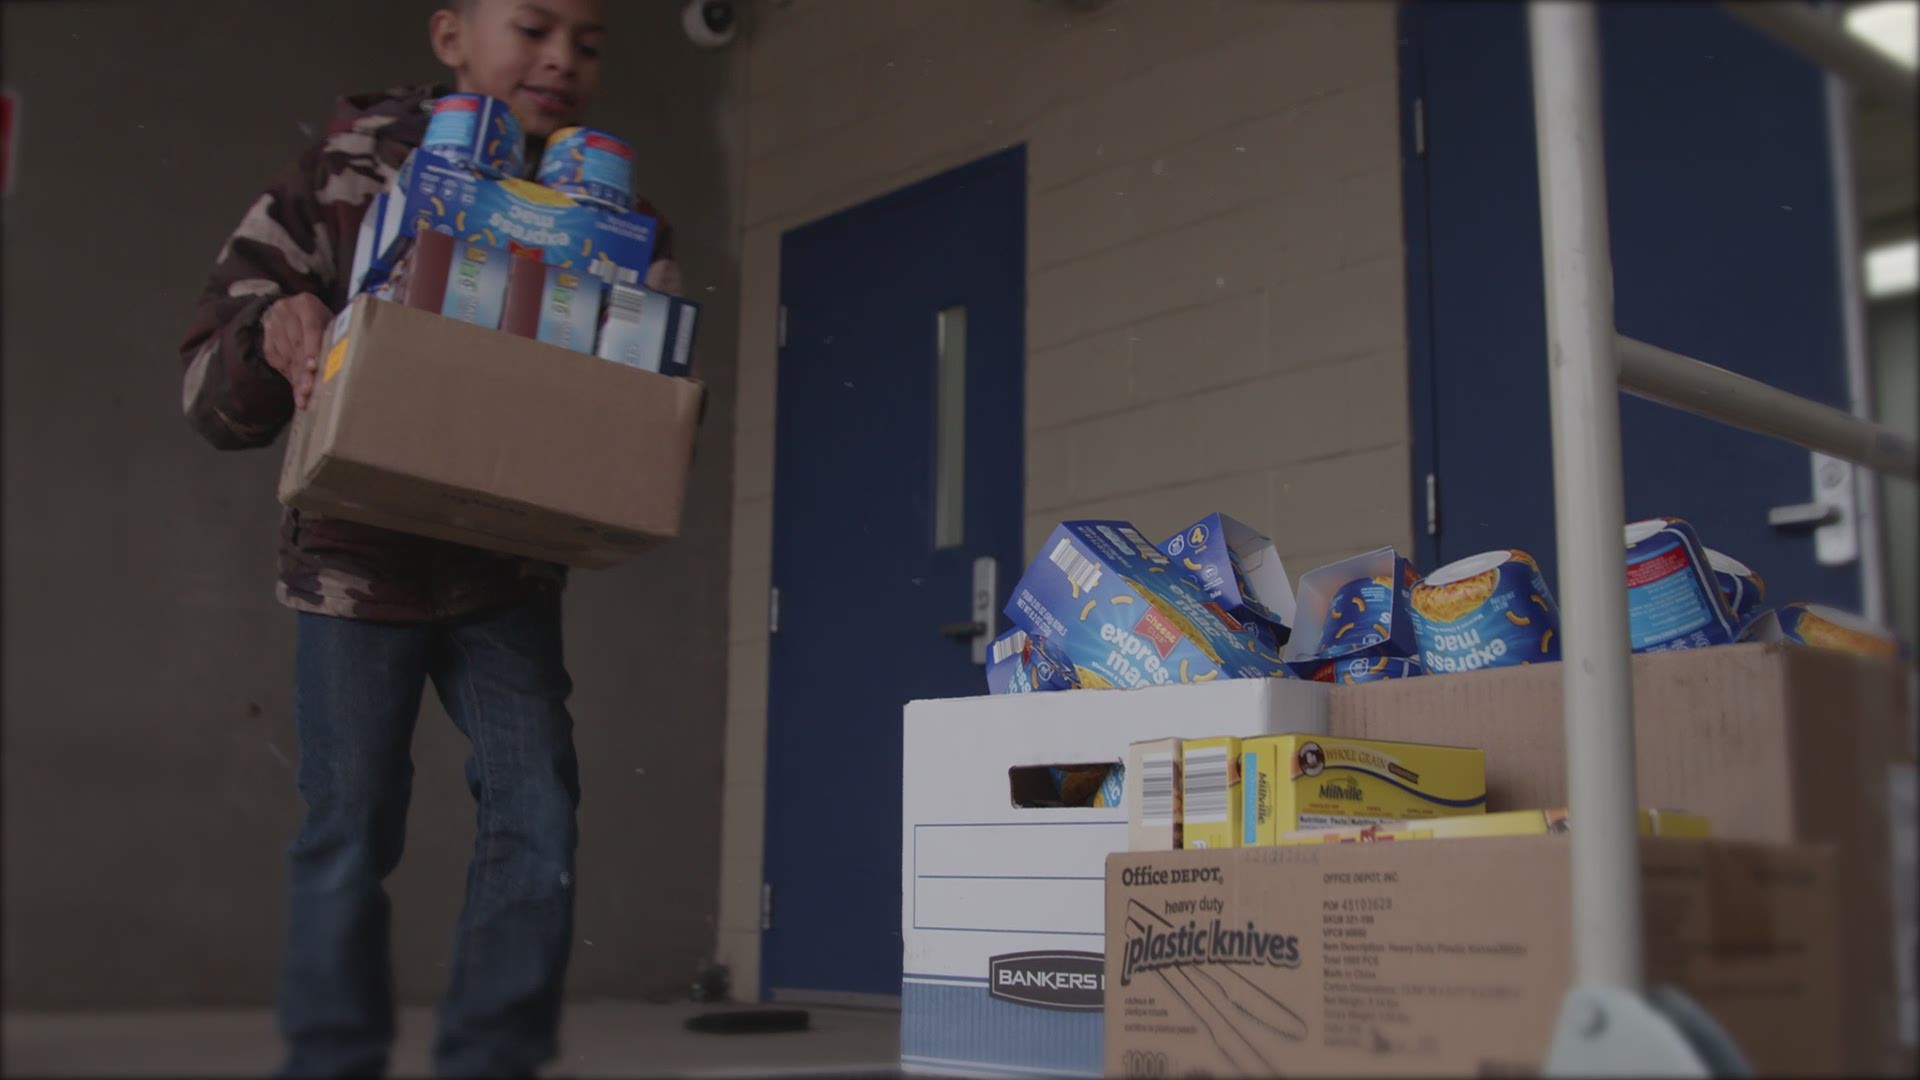 Inspired by a public service announcement about hunger he saw when he was 6 years old, Logan began a non-profit program to provide lunches for school kids who might otherwise go hungry on weekends.